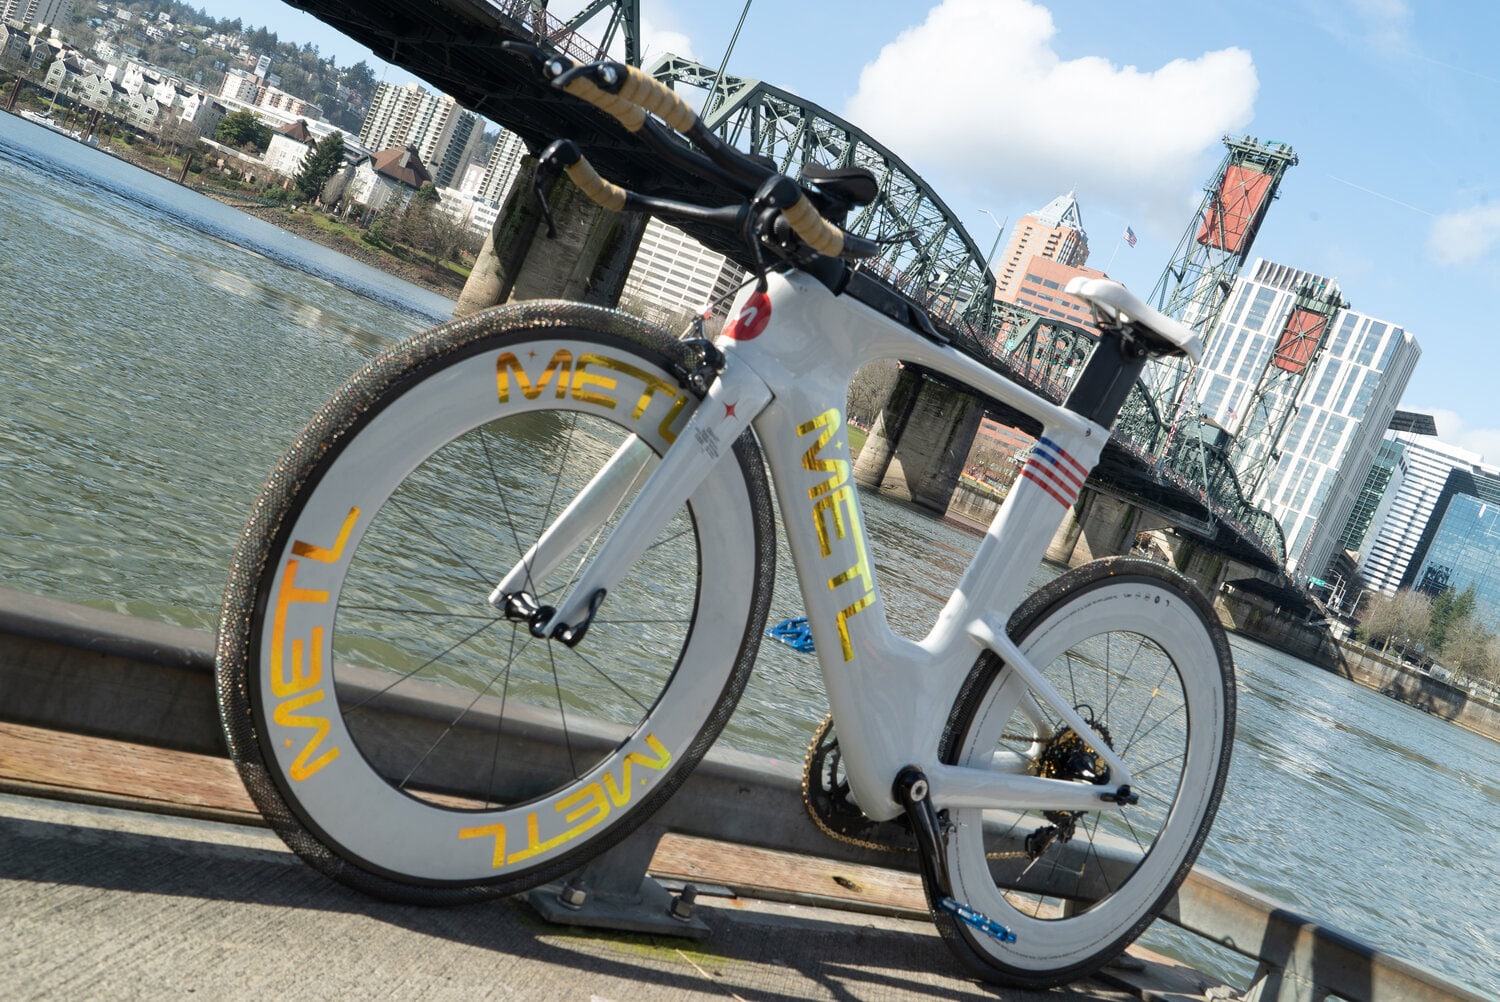 NASA startup unveils METL bike tires that are superelastic, airless, never go flat.